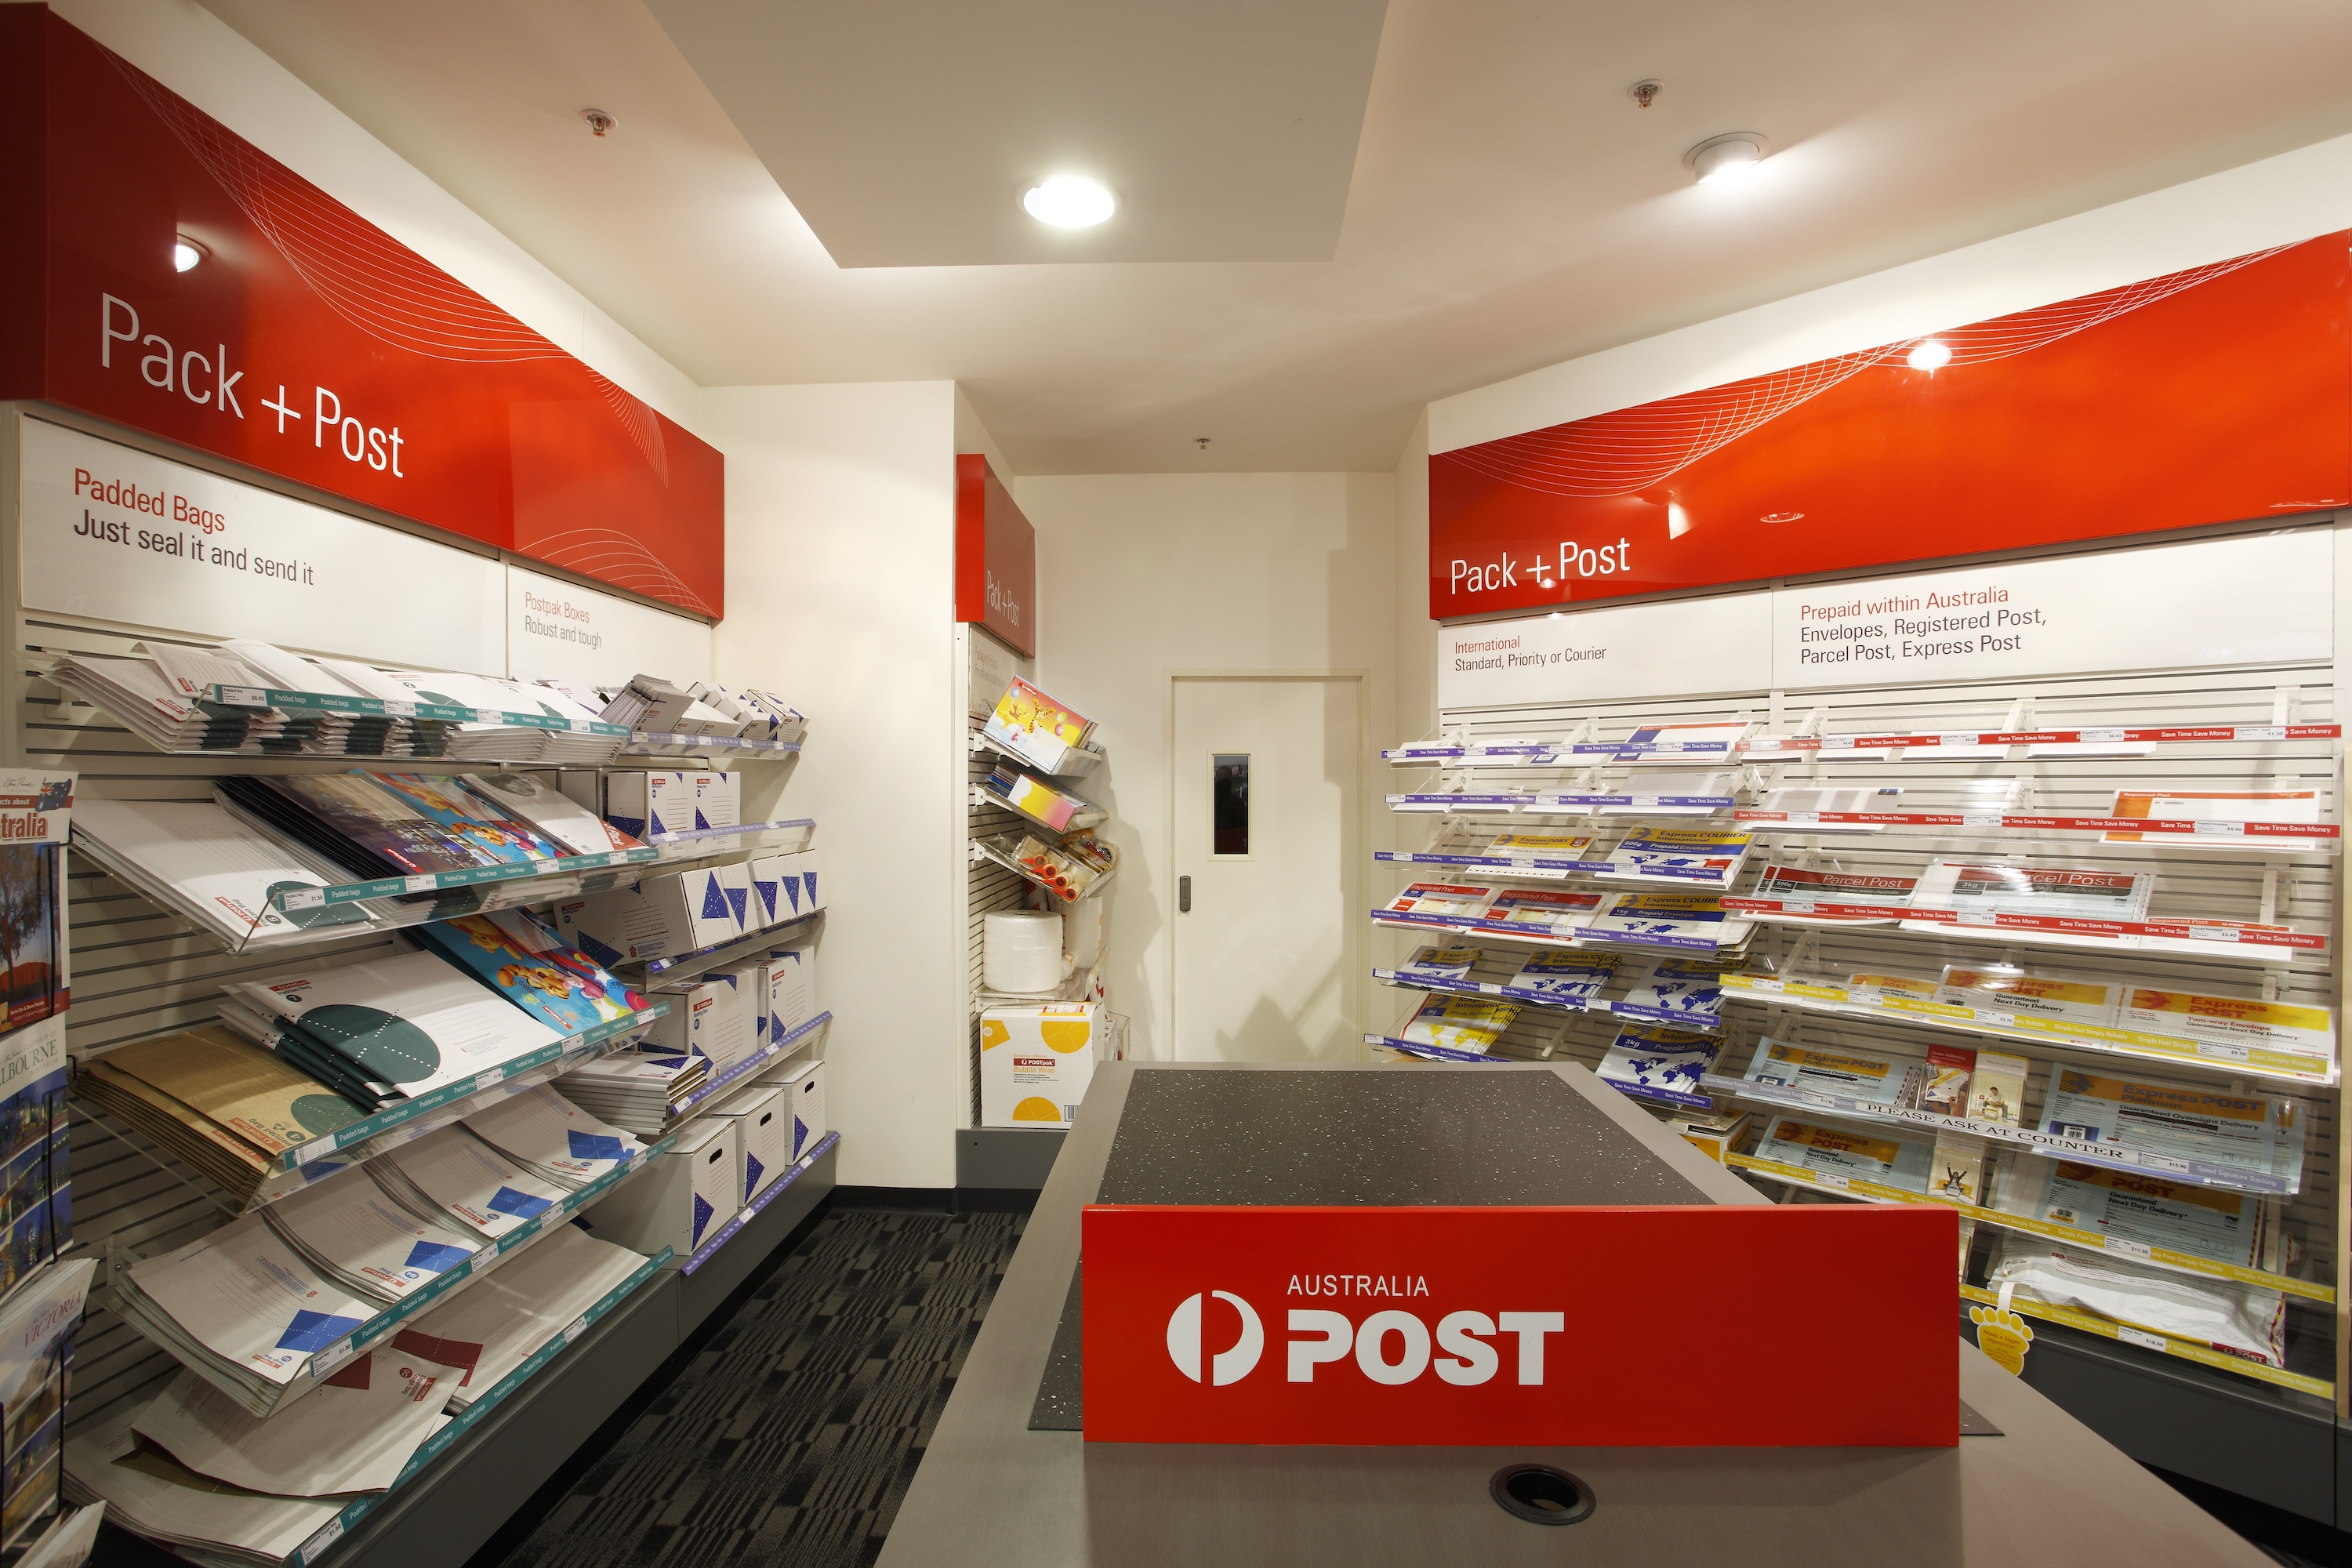 Interior of Australia Post shop with pack and post shelving